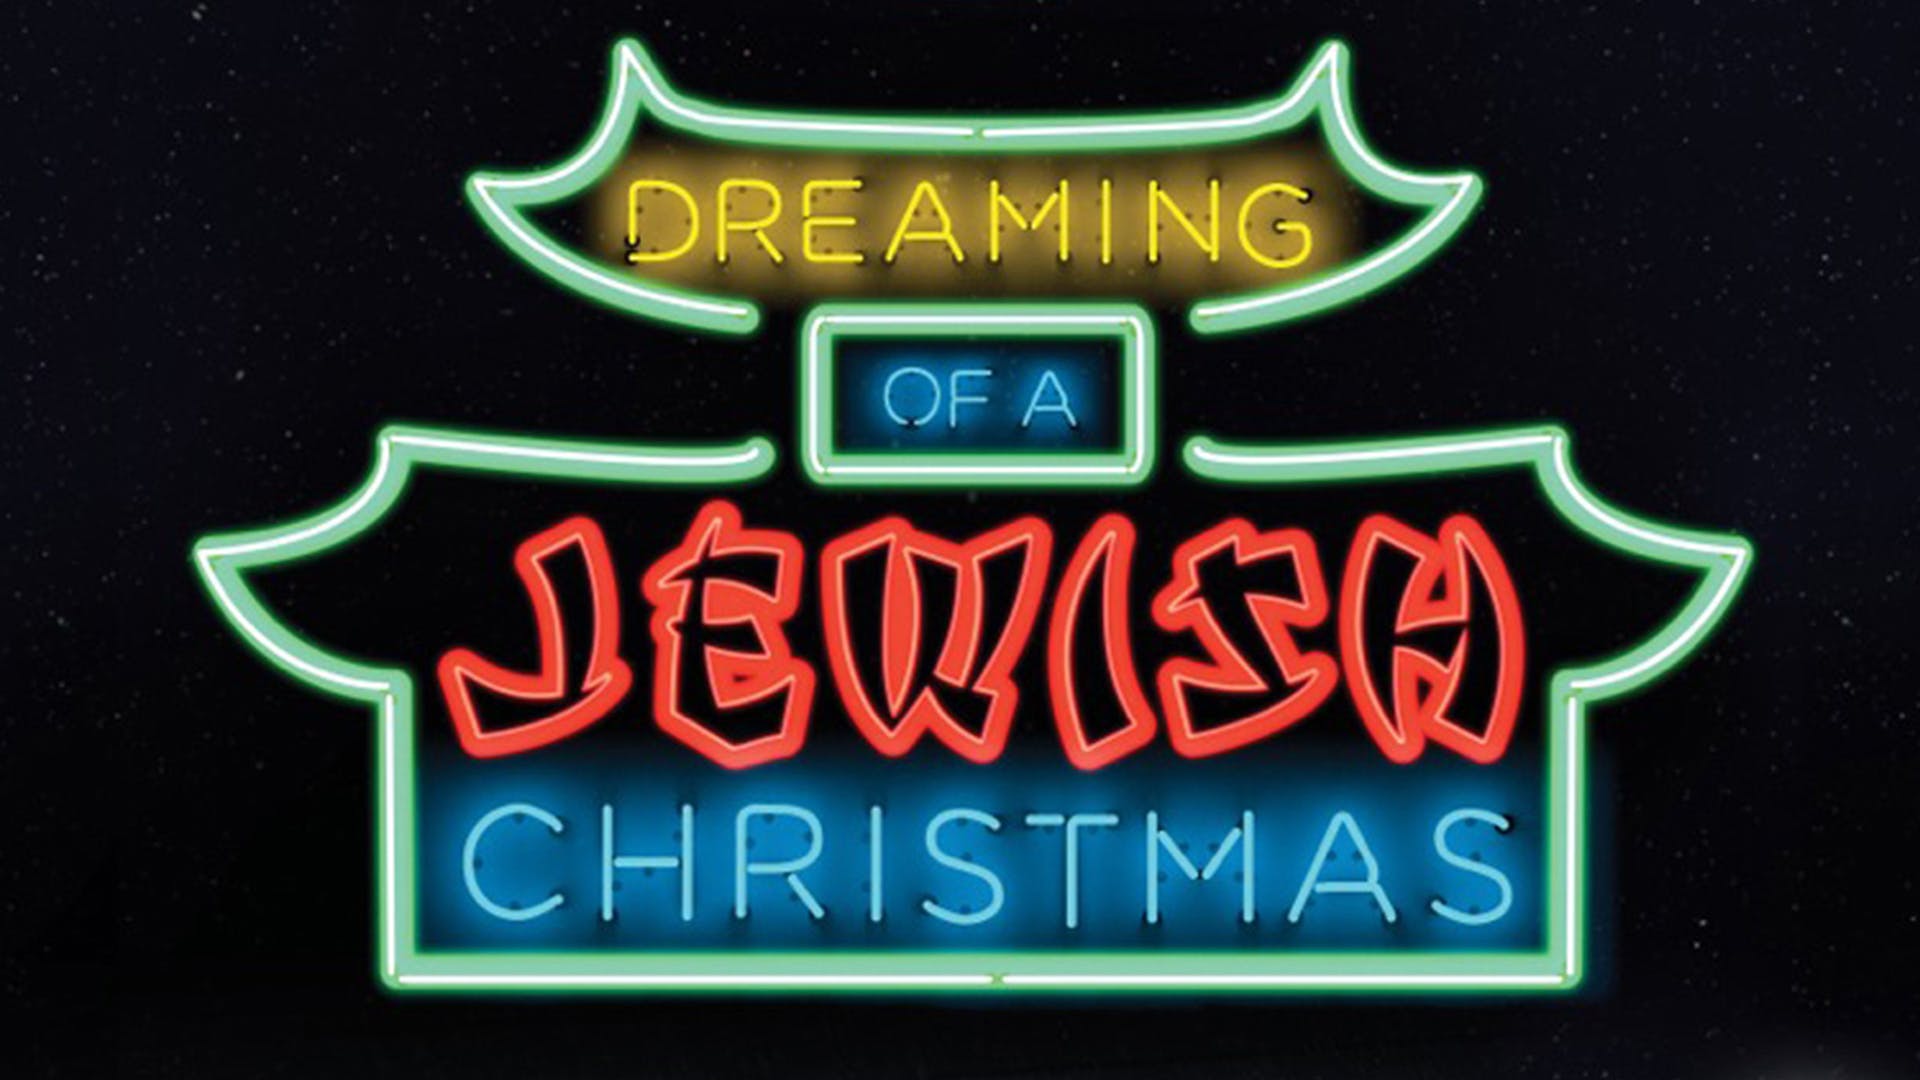 Image with text saying Dreaming of a Jewish Christmas